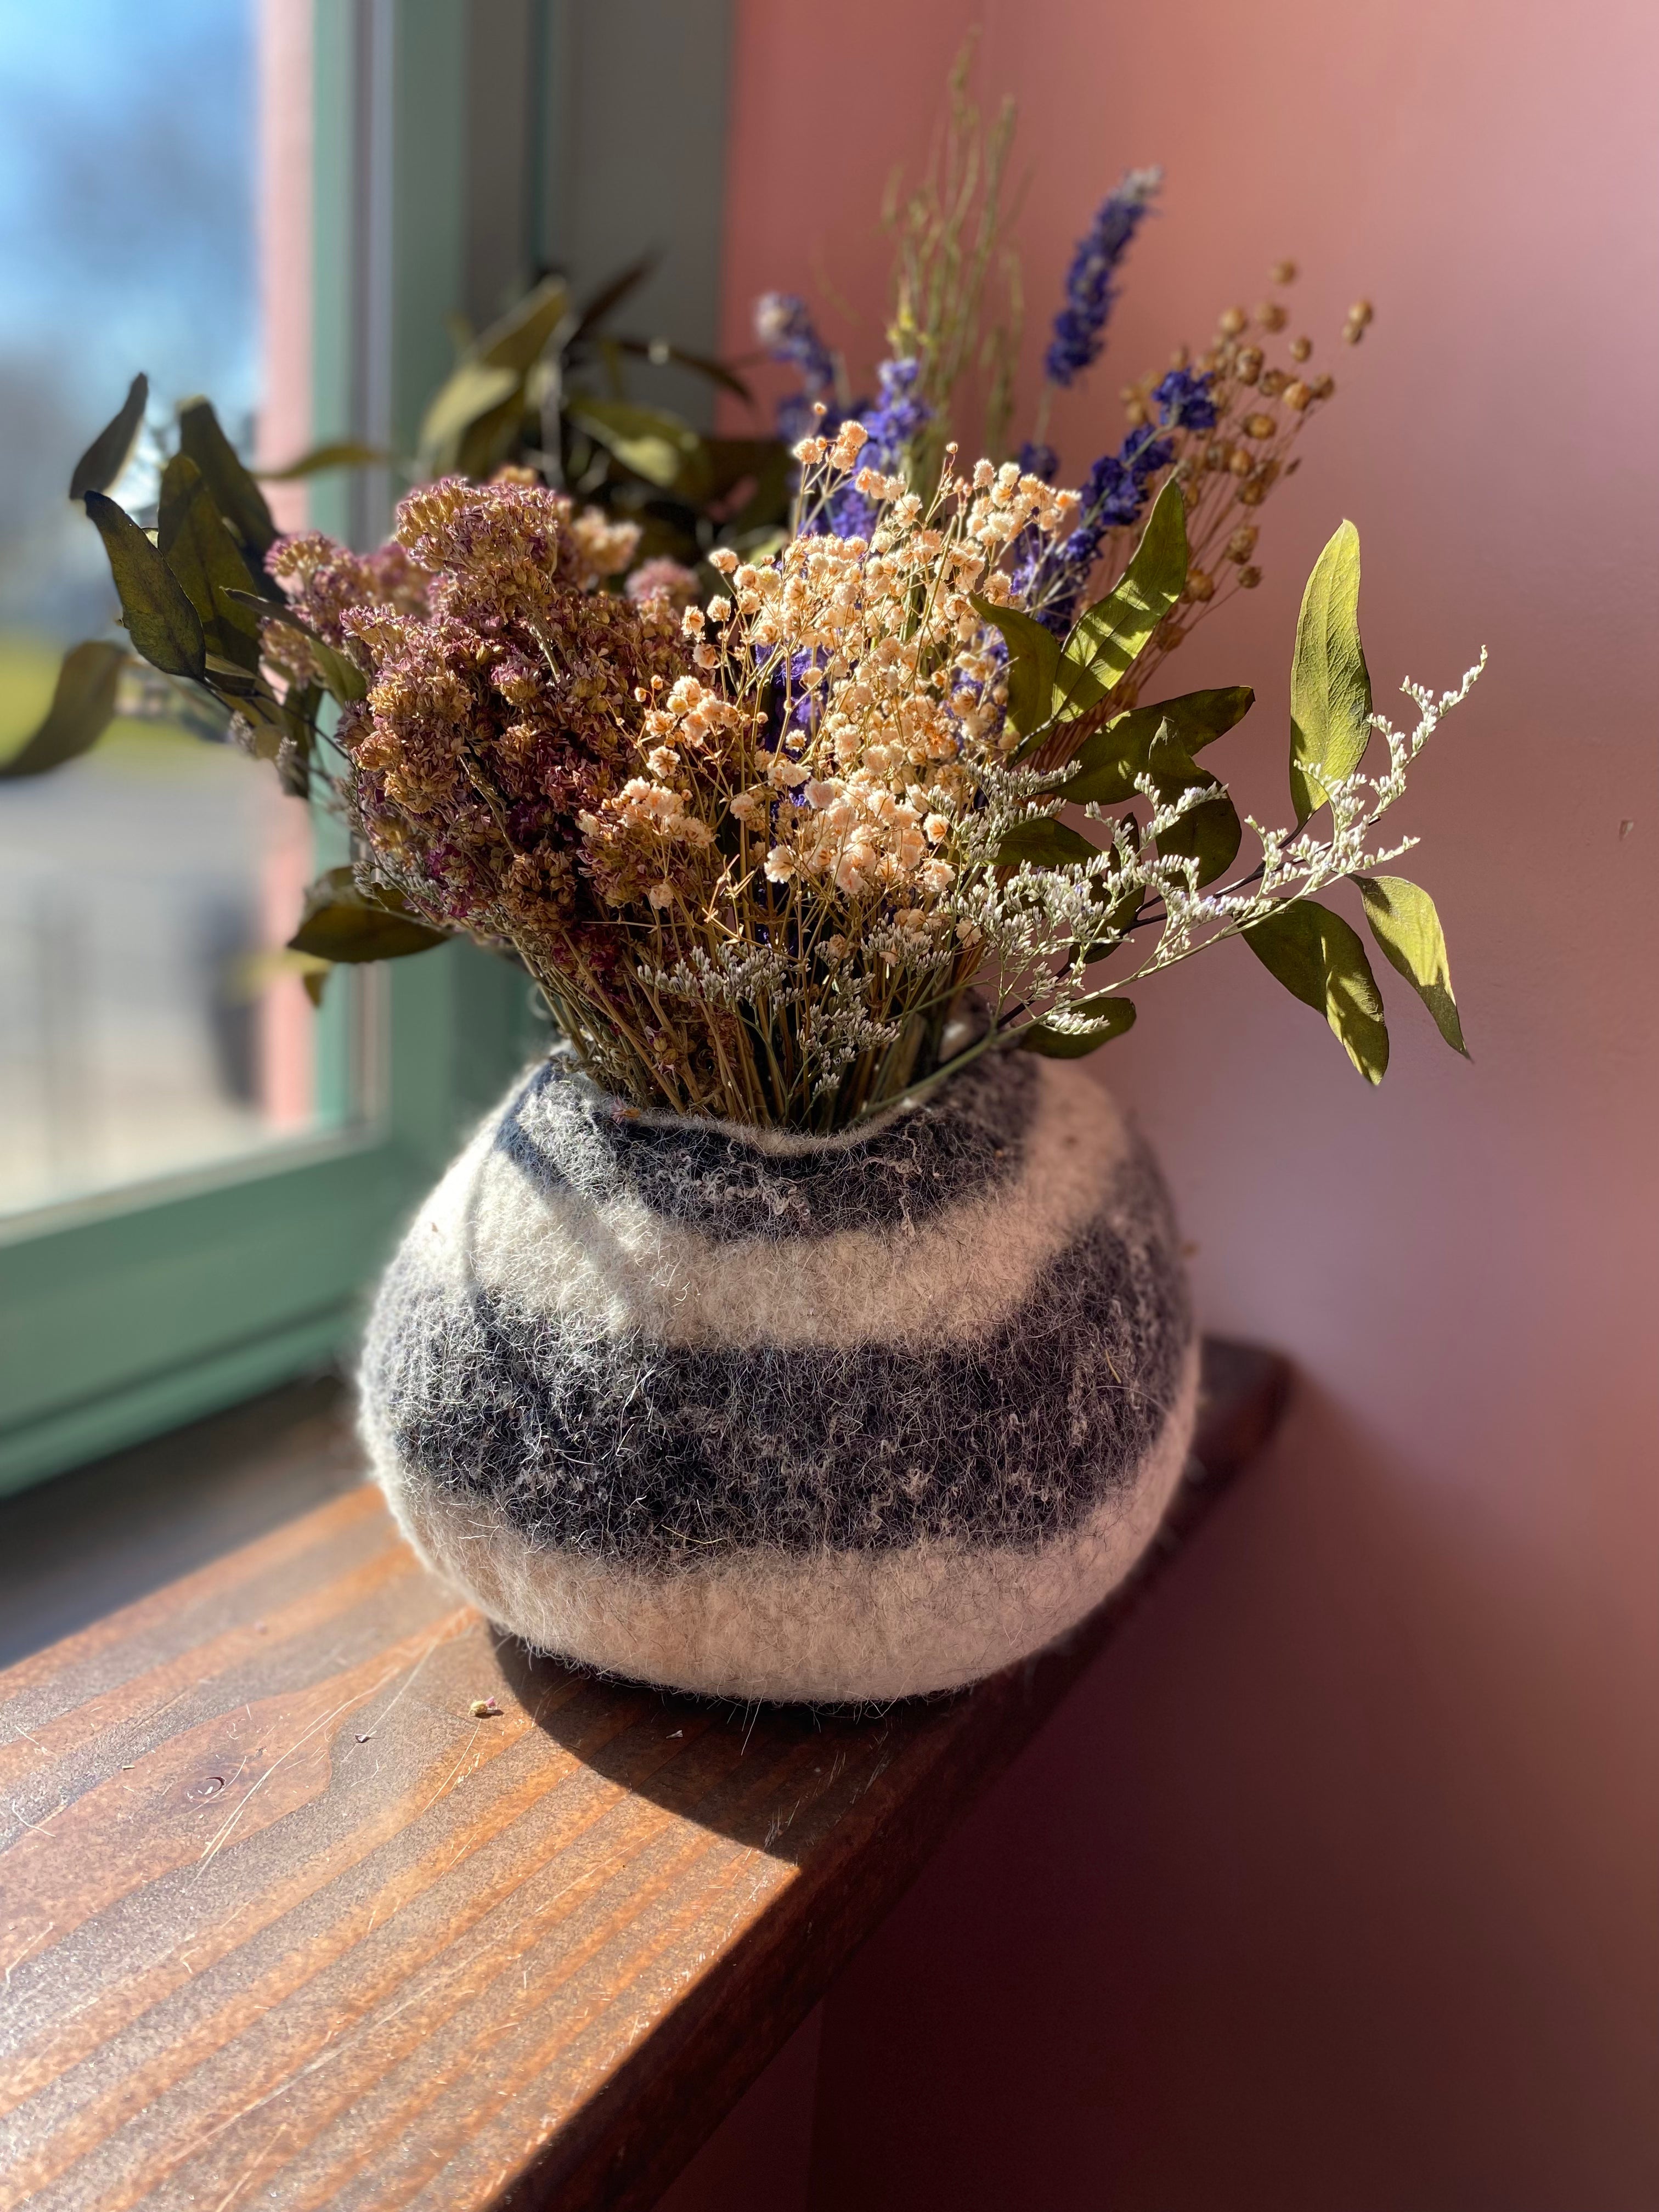 Dried Flowers in Fabric Vase